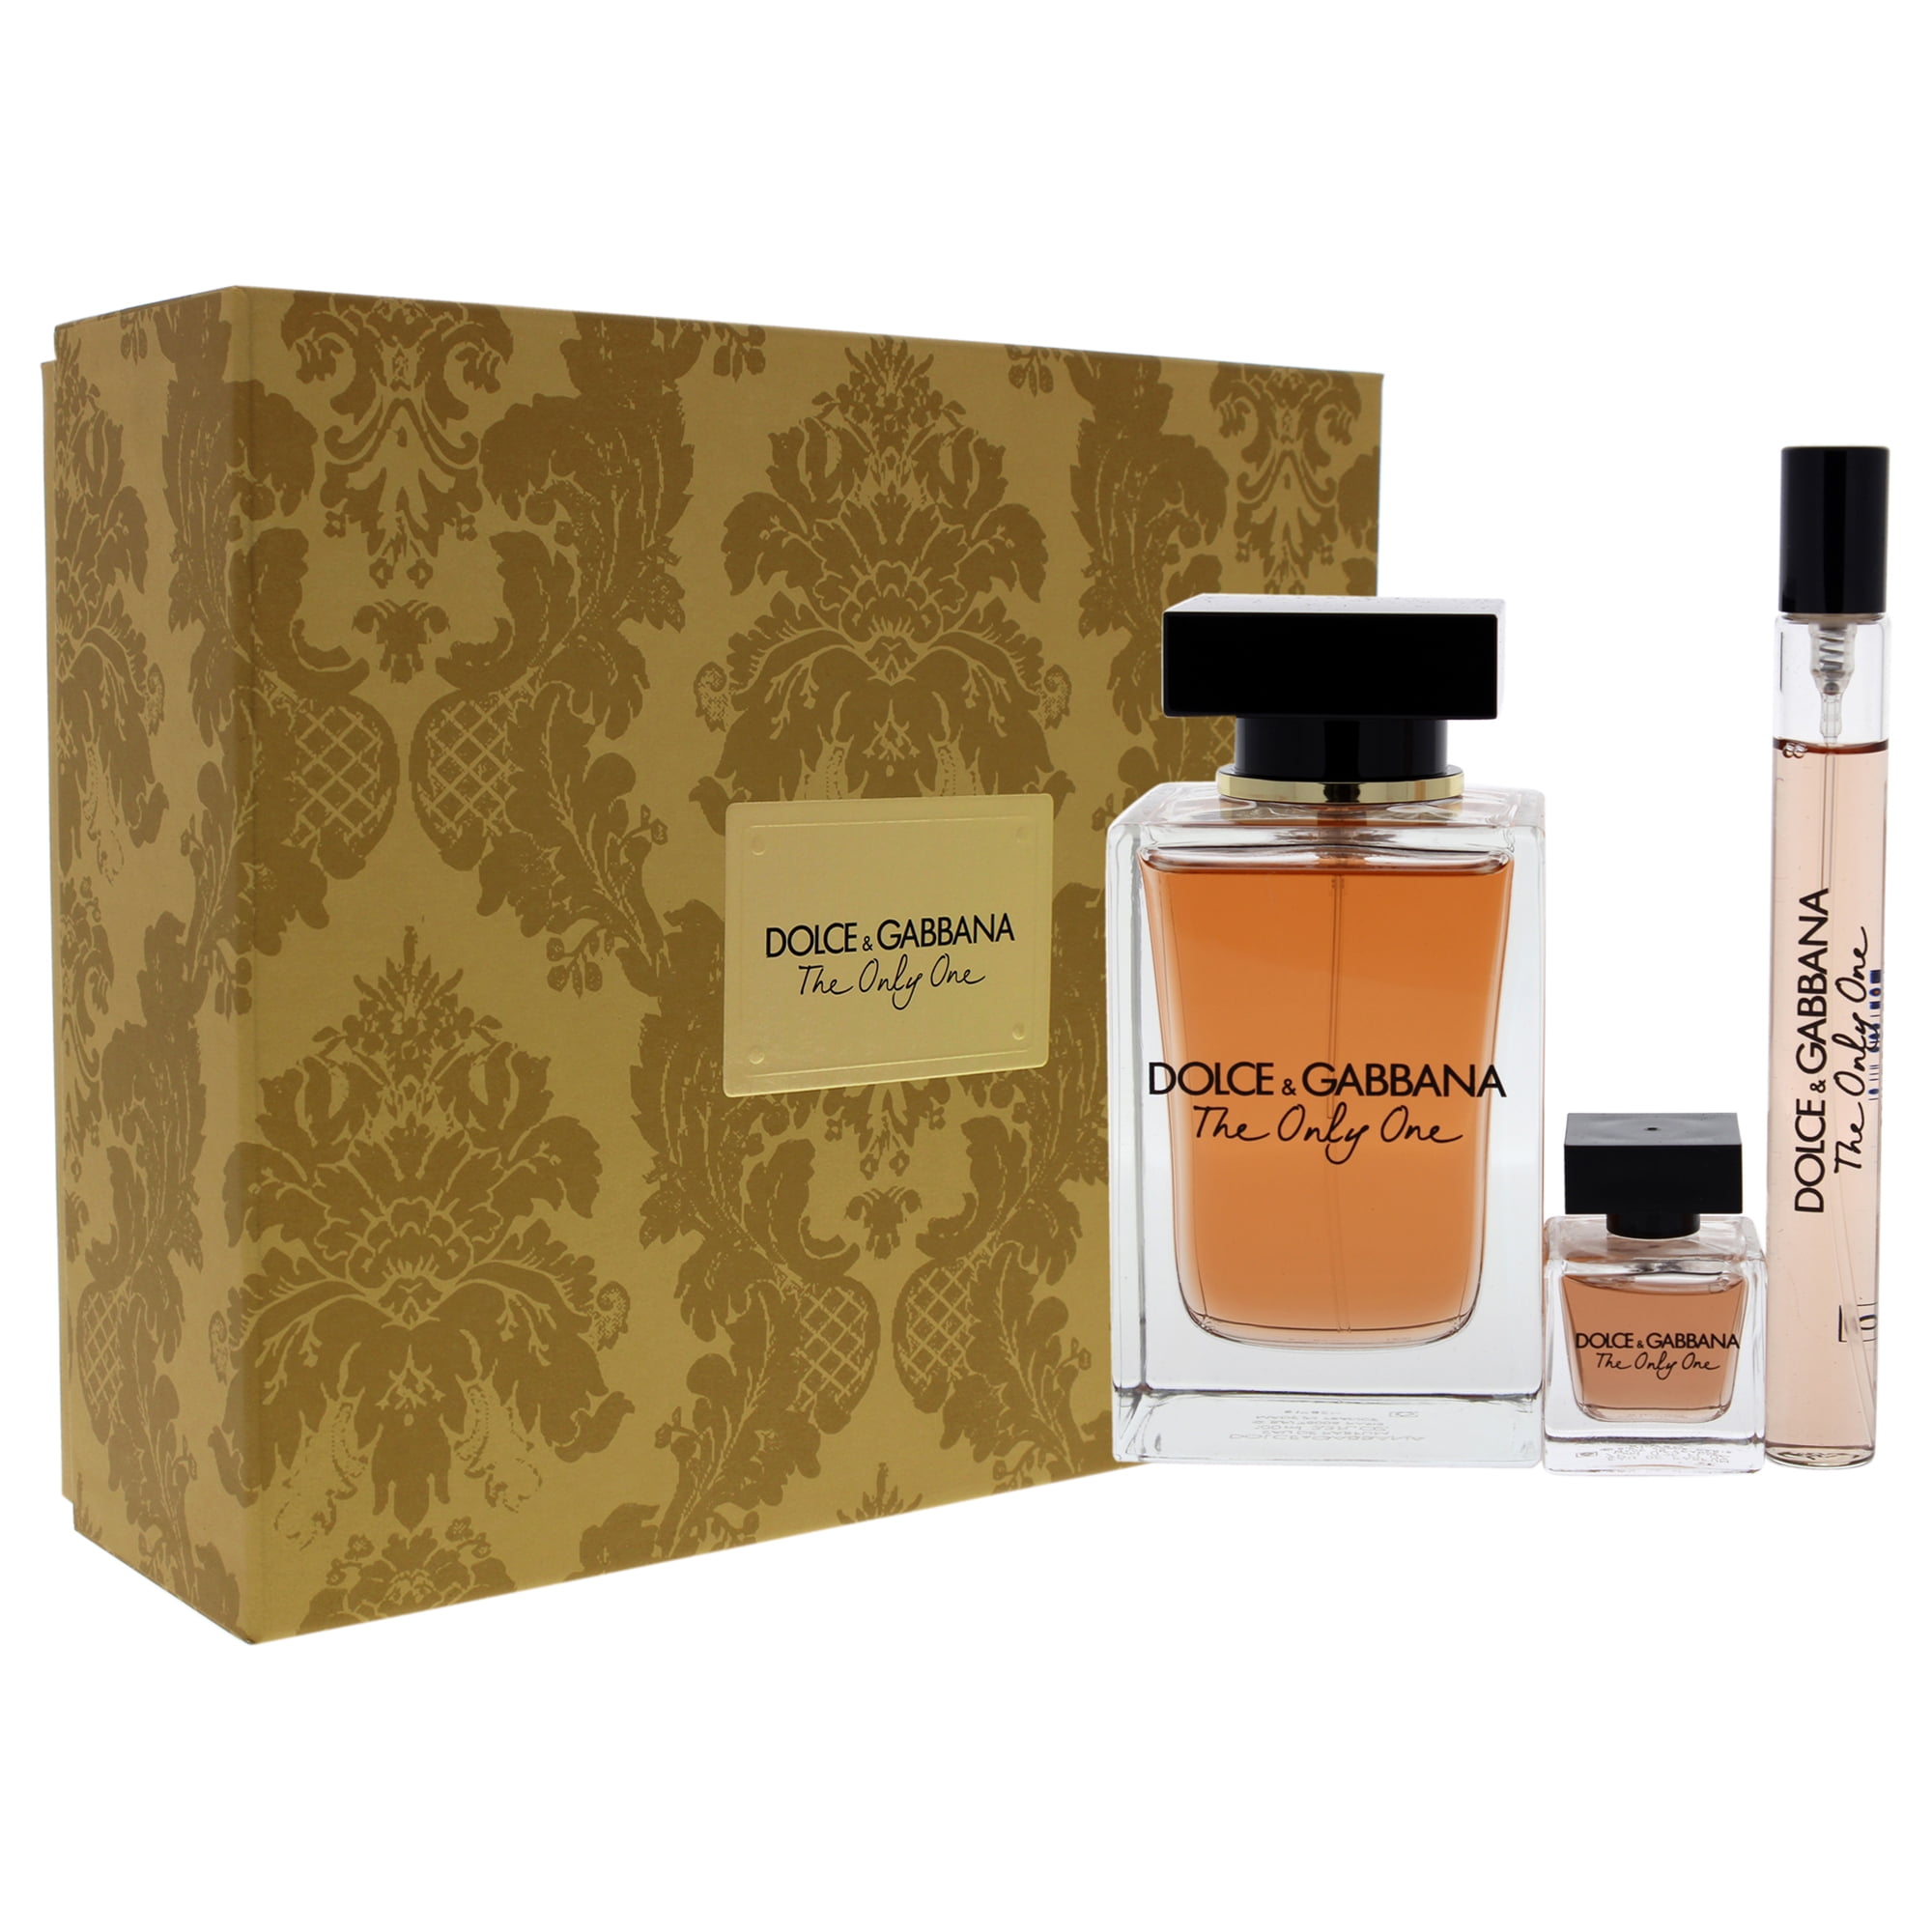 Dolce & Gabbana - The Only One by Dolce and Gabbana for Women - 3 Pc